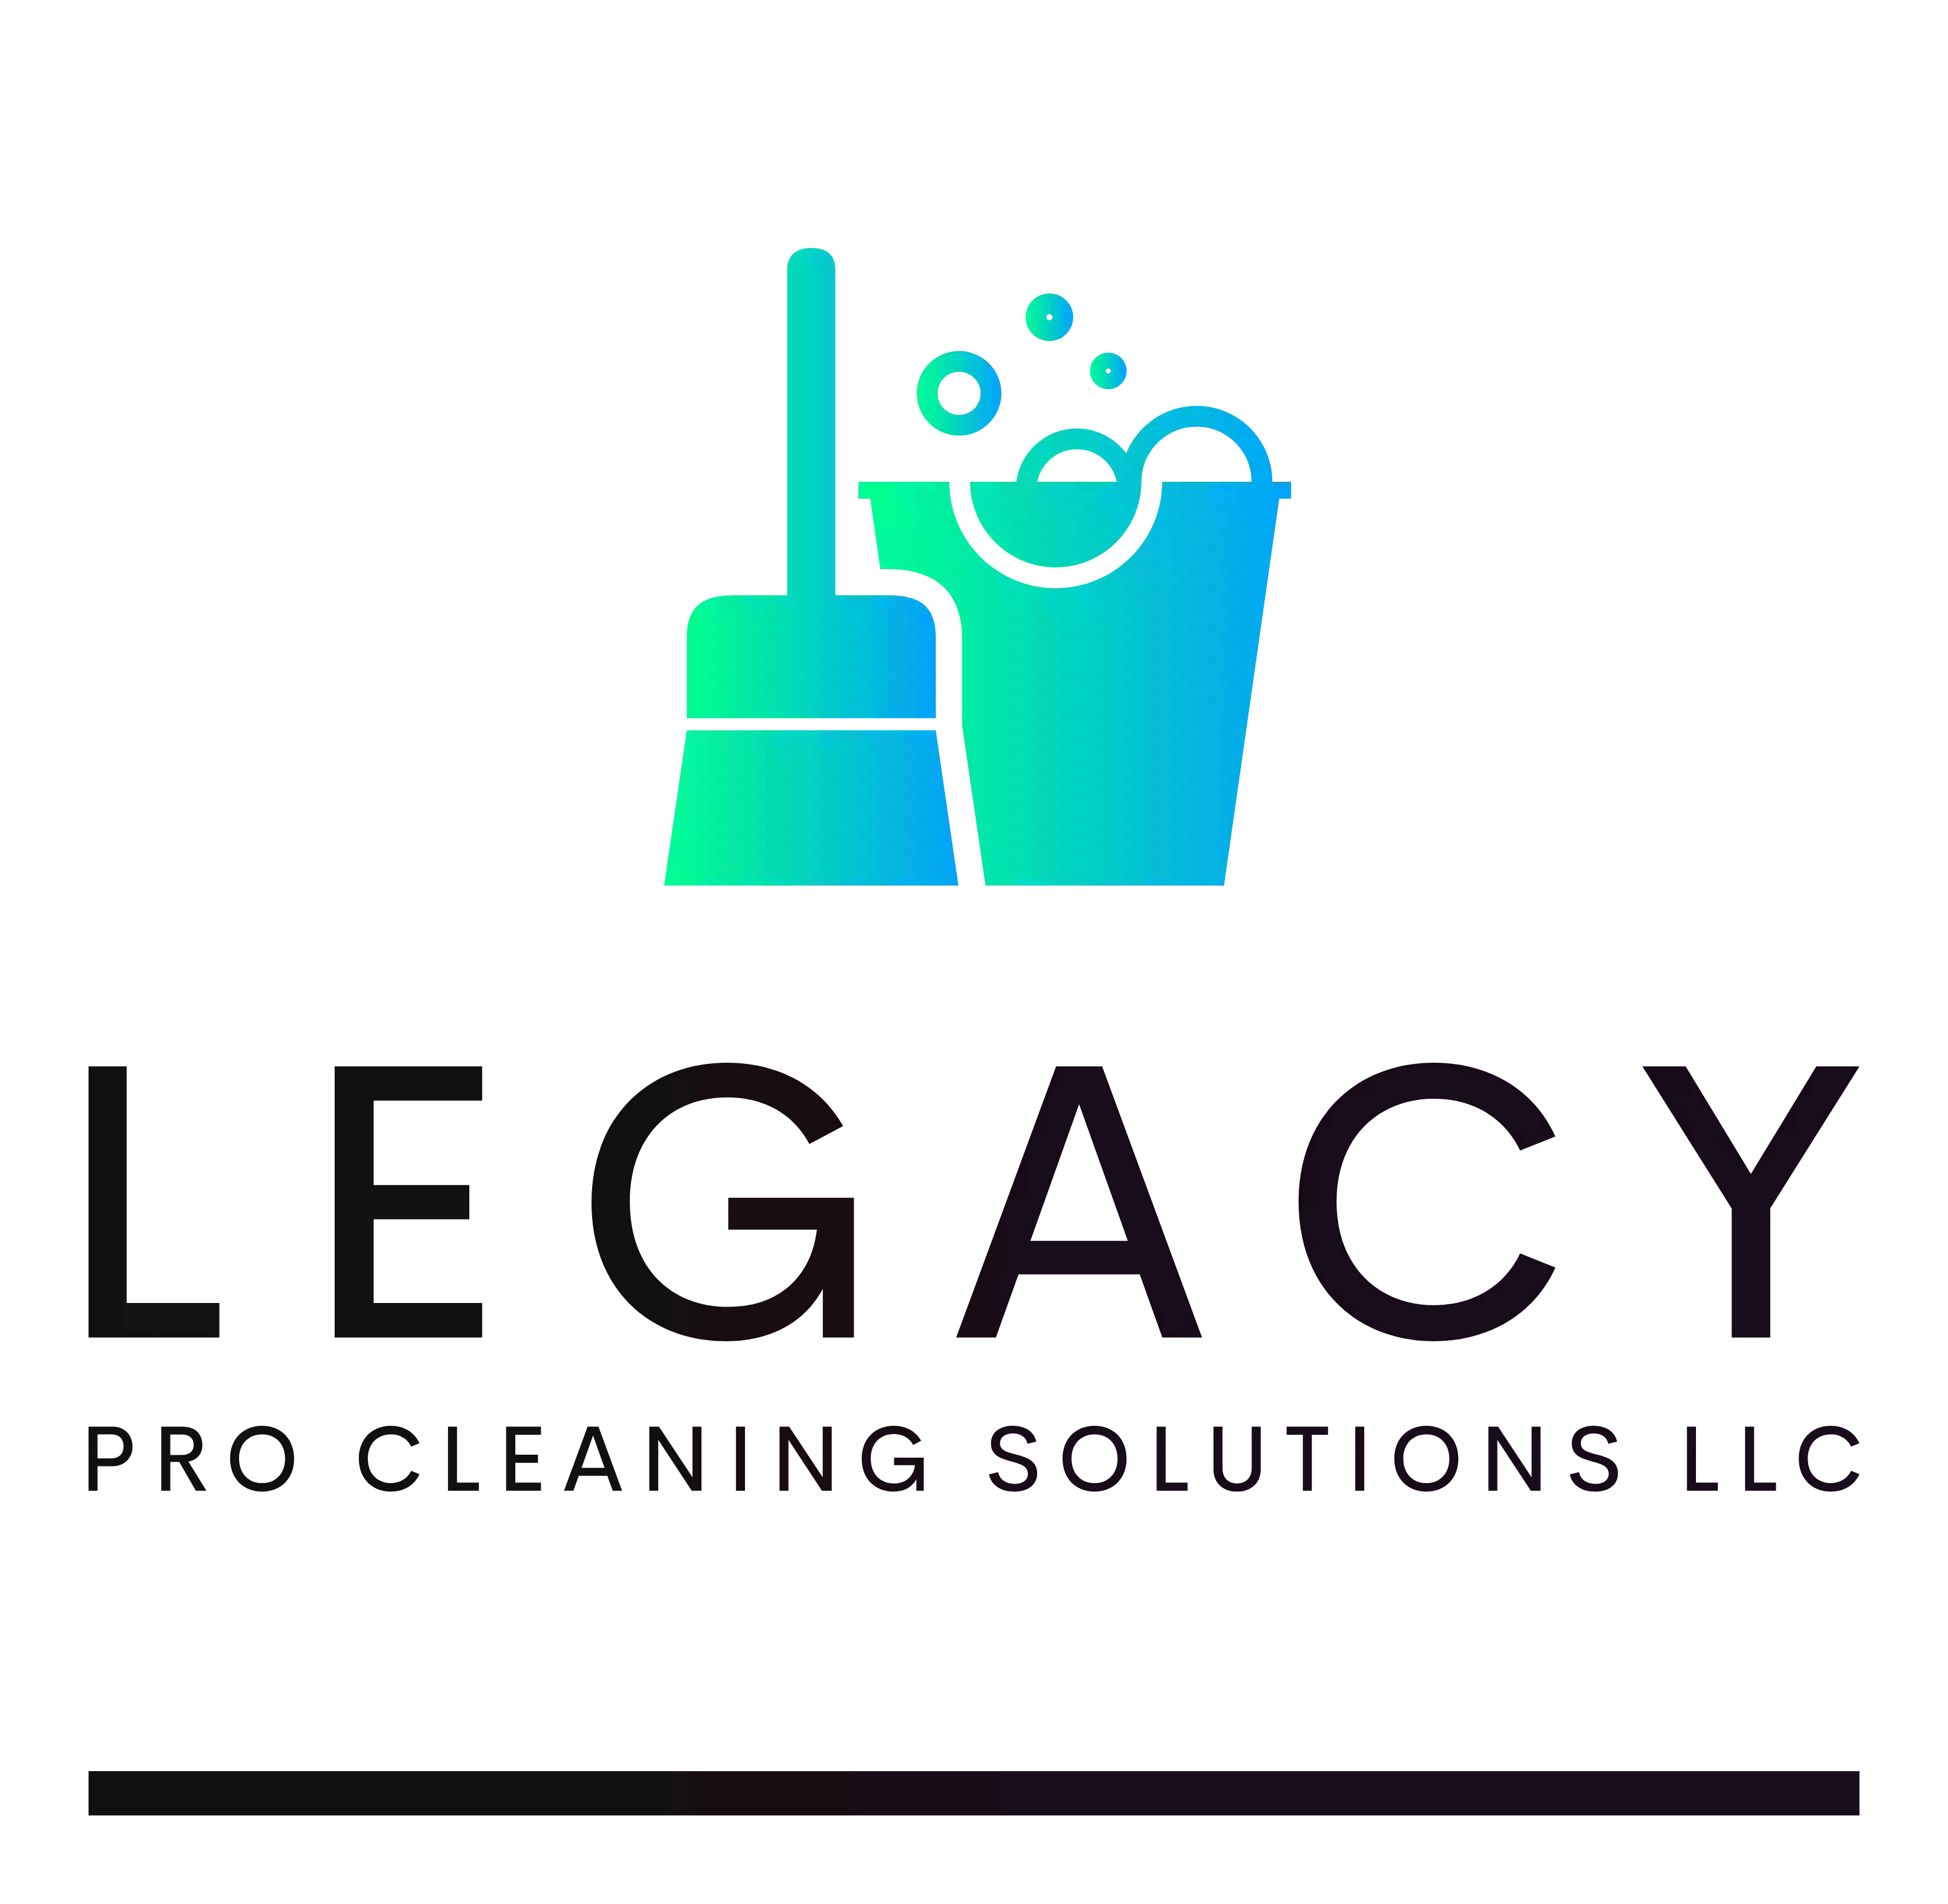 Legacy pro cleaning solutions llc